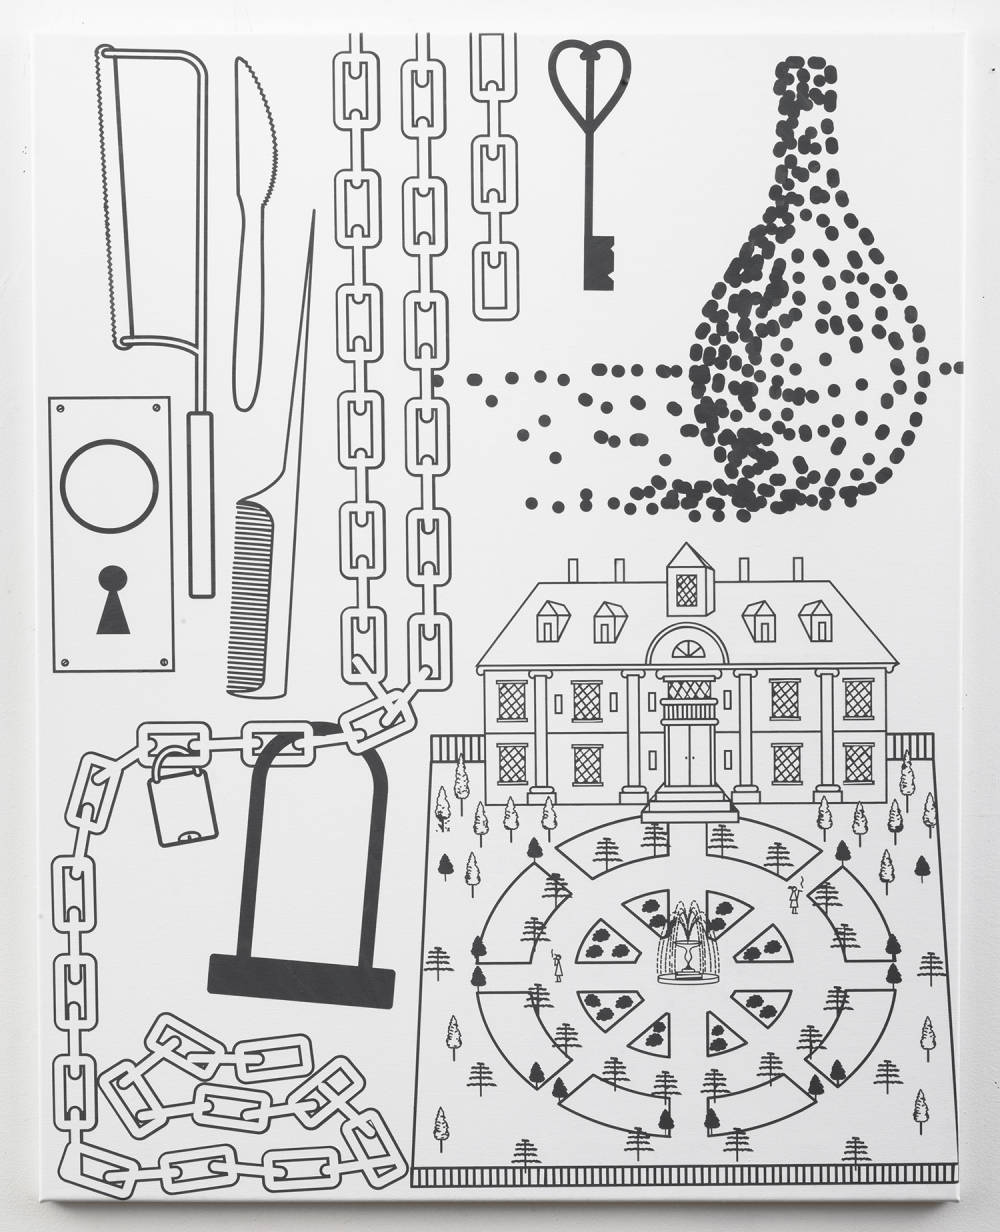 Image of an oil on canvas painting depicting a number of objects: knife, saw, comb, key, chains, bike lock, and an estate with an ornate garden. 